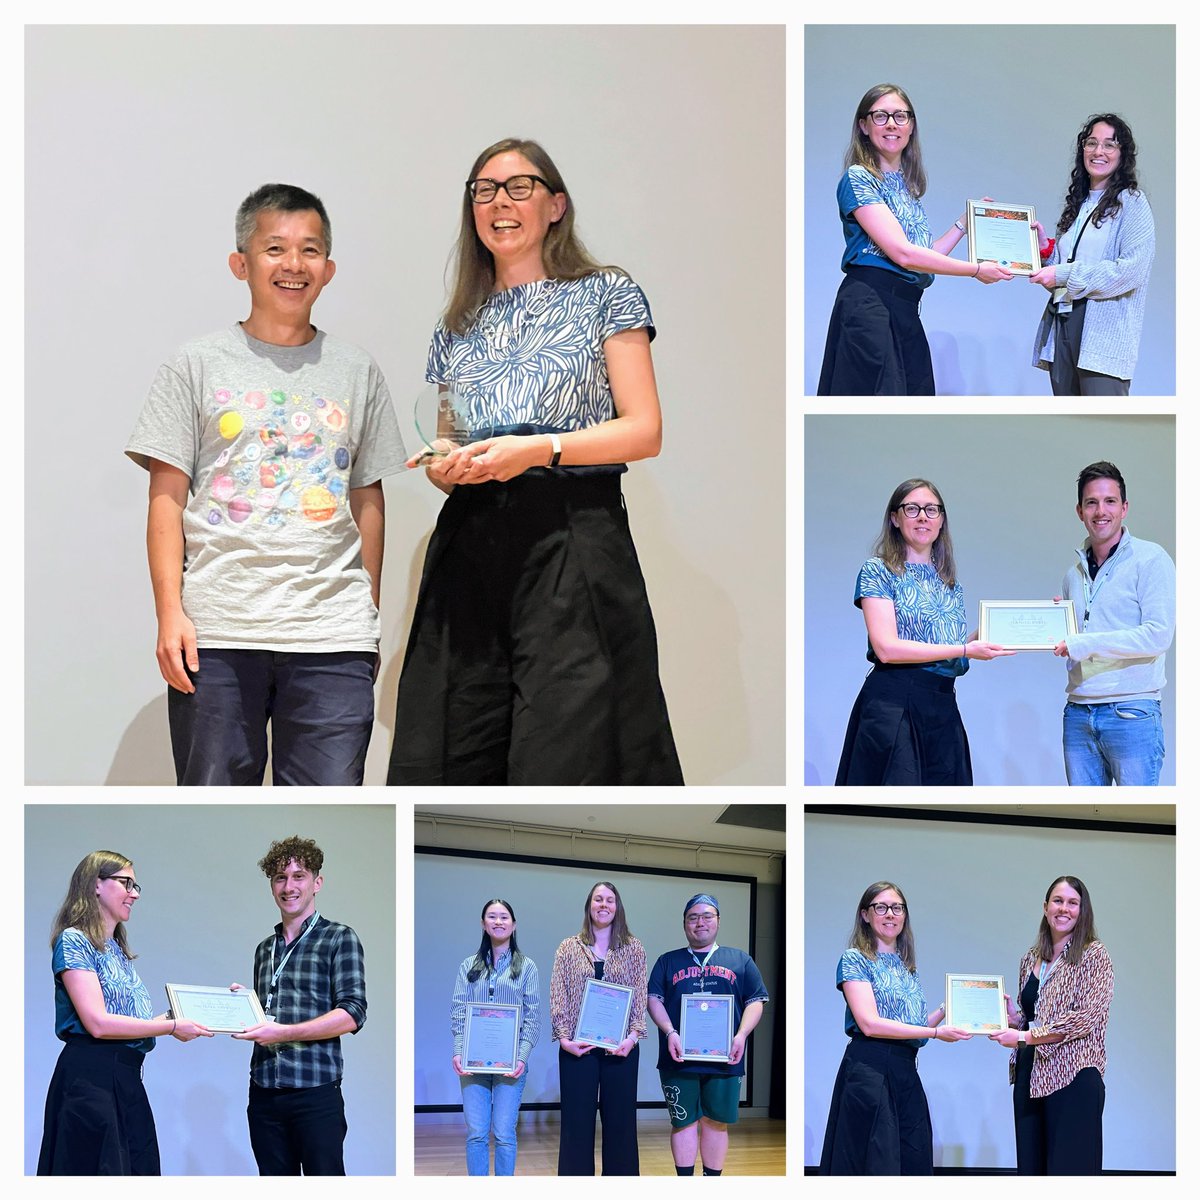 Congratulations again to @HSCwatcher for being awarded the Maria Goeppert Mayer Award 2023 And to our students @AbigailGroot129 @daniel_reed_ @MichaelTrpceski and Marise van der Spuy winning the INCITe awards sponsored by @LightMicroAus and @cancerNSW #AIMS2023